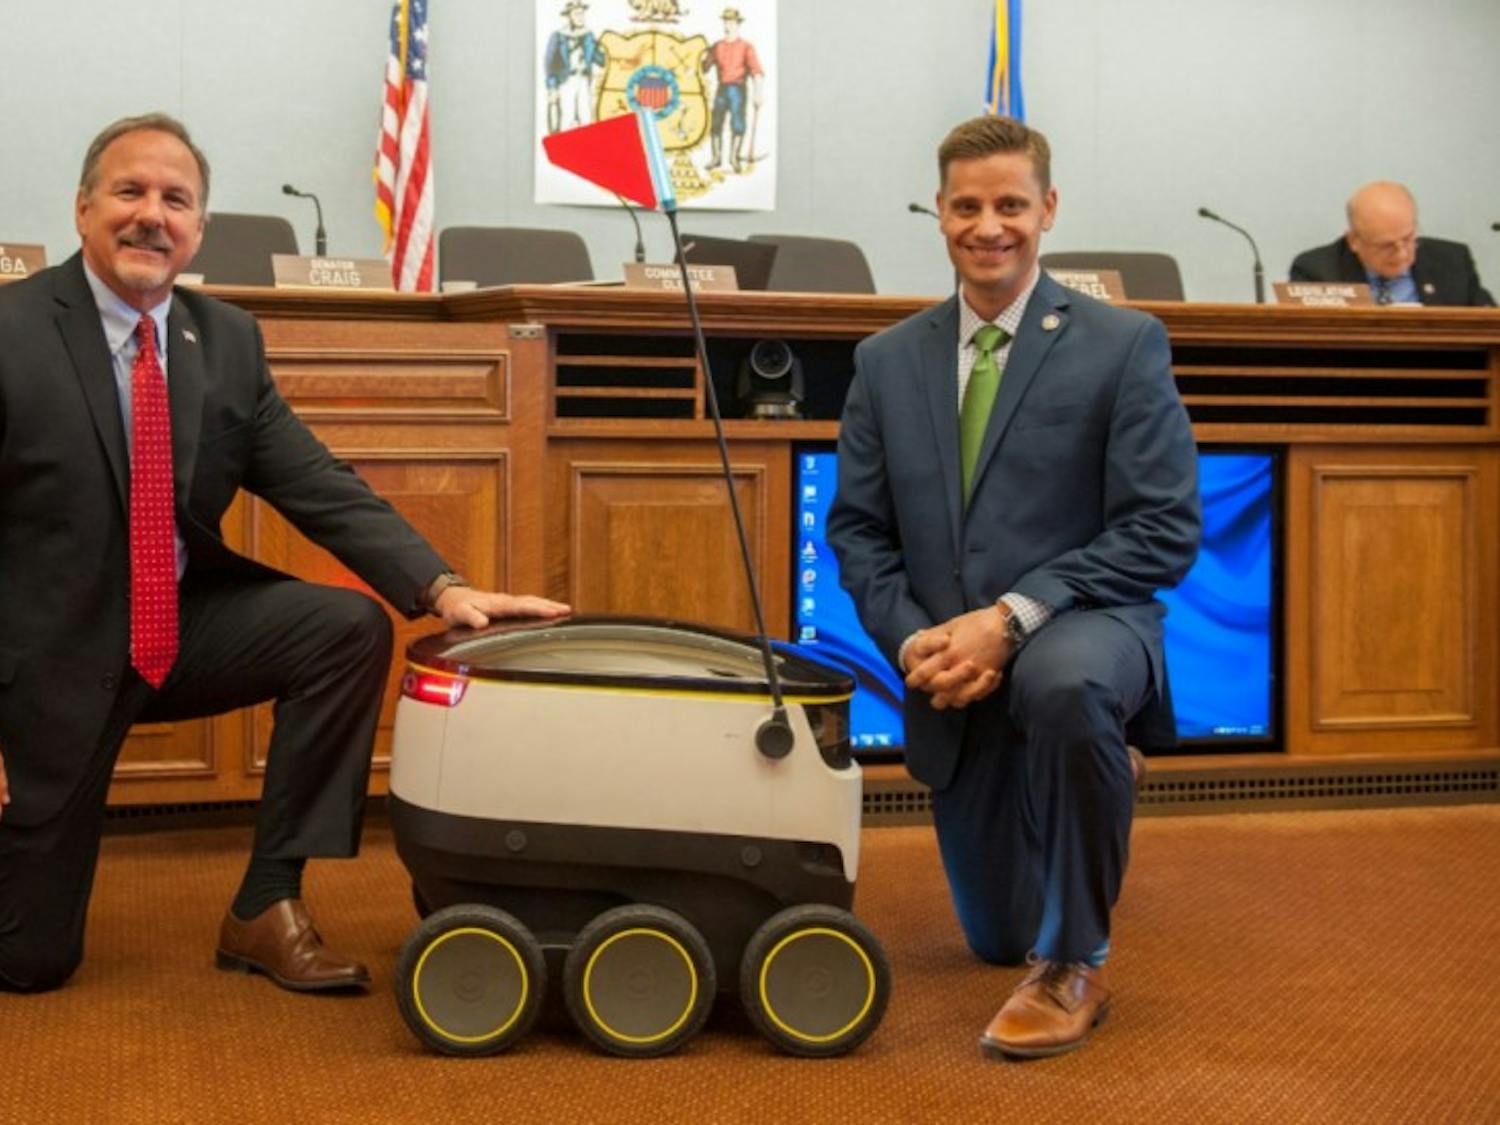 State Rep. Mike Kuglitsch, R-New Berlin, (left) and state Sen. Chris Kapenga, R-Delafield, (right) with a Starship robot after the technology company gave a demo during a committee hearing.&nbsp;